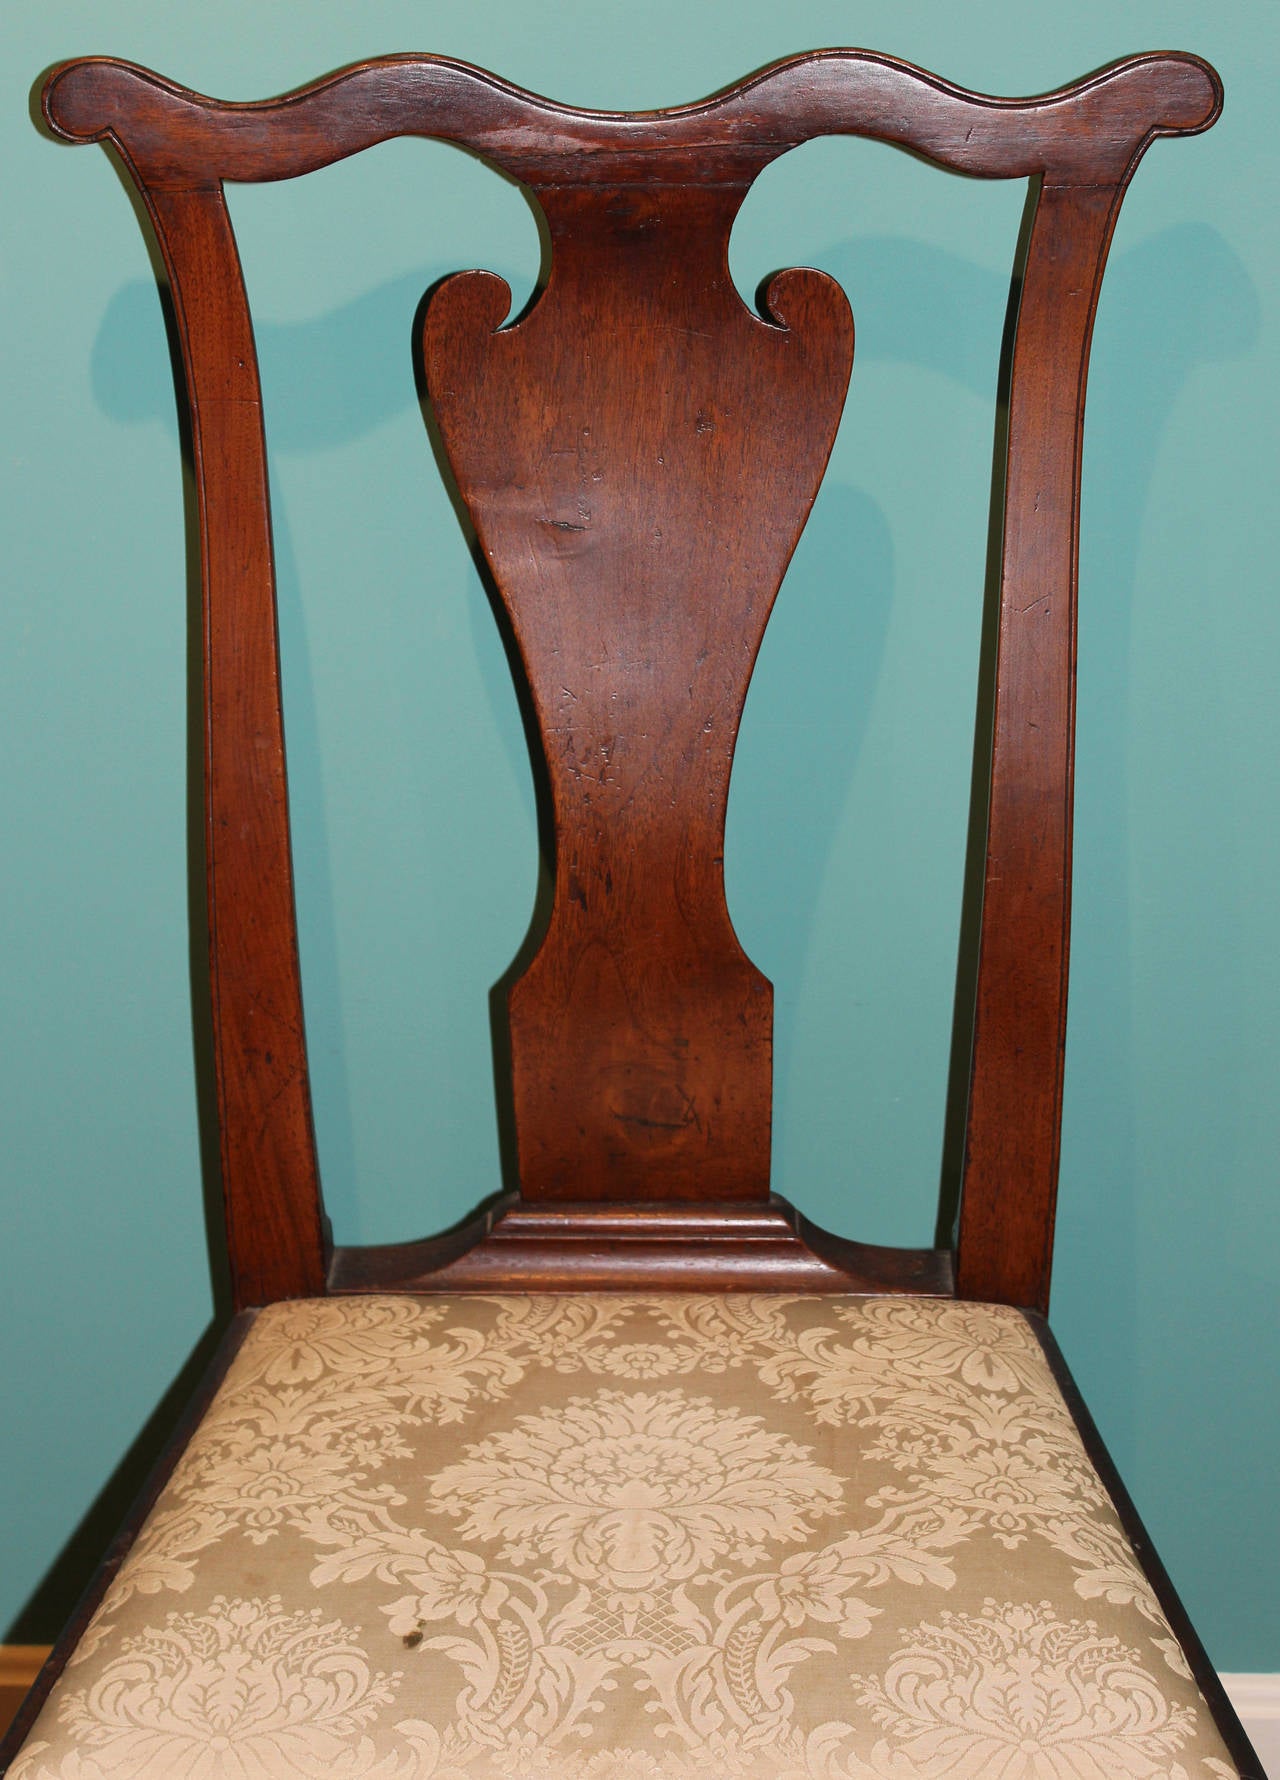 A fine example of a Philadelphia Queen Anne Walnut Side Chair, circa 1755, probably the workshop of William Savery. Incised cupid's bow crest above a solid vasiform splat and trapezoidal slip seat supported by cabriole legs terminating in trifid